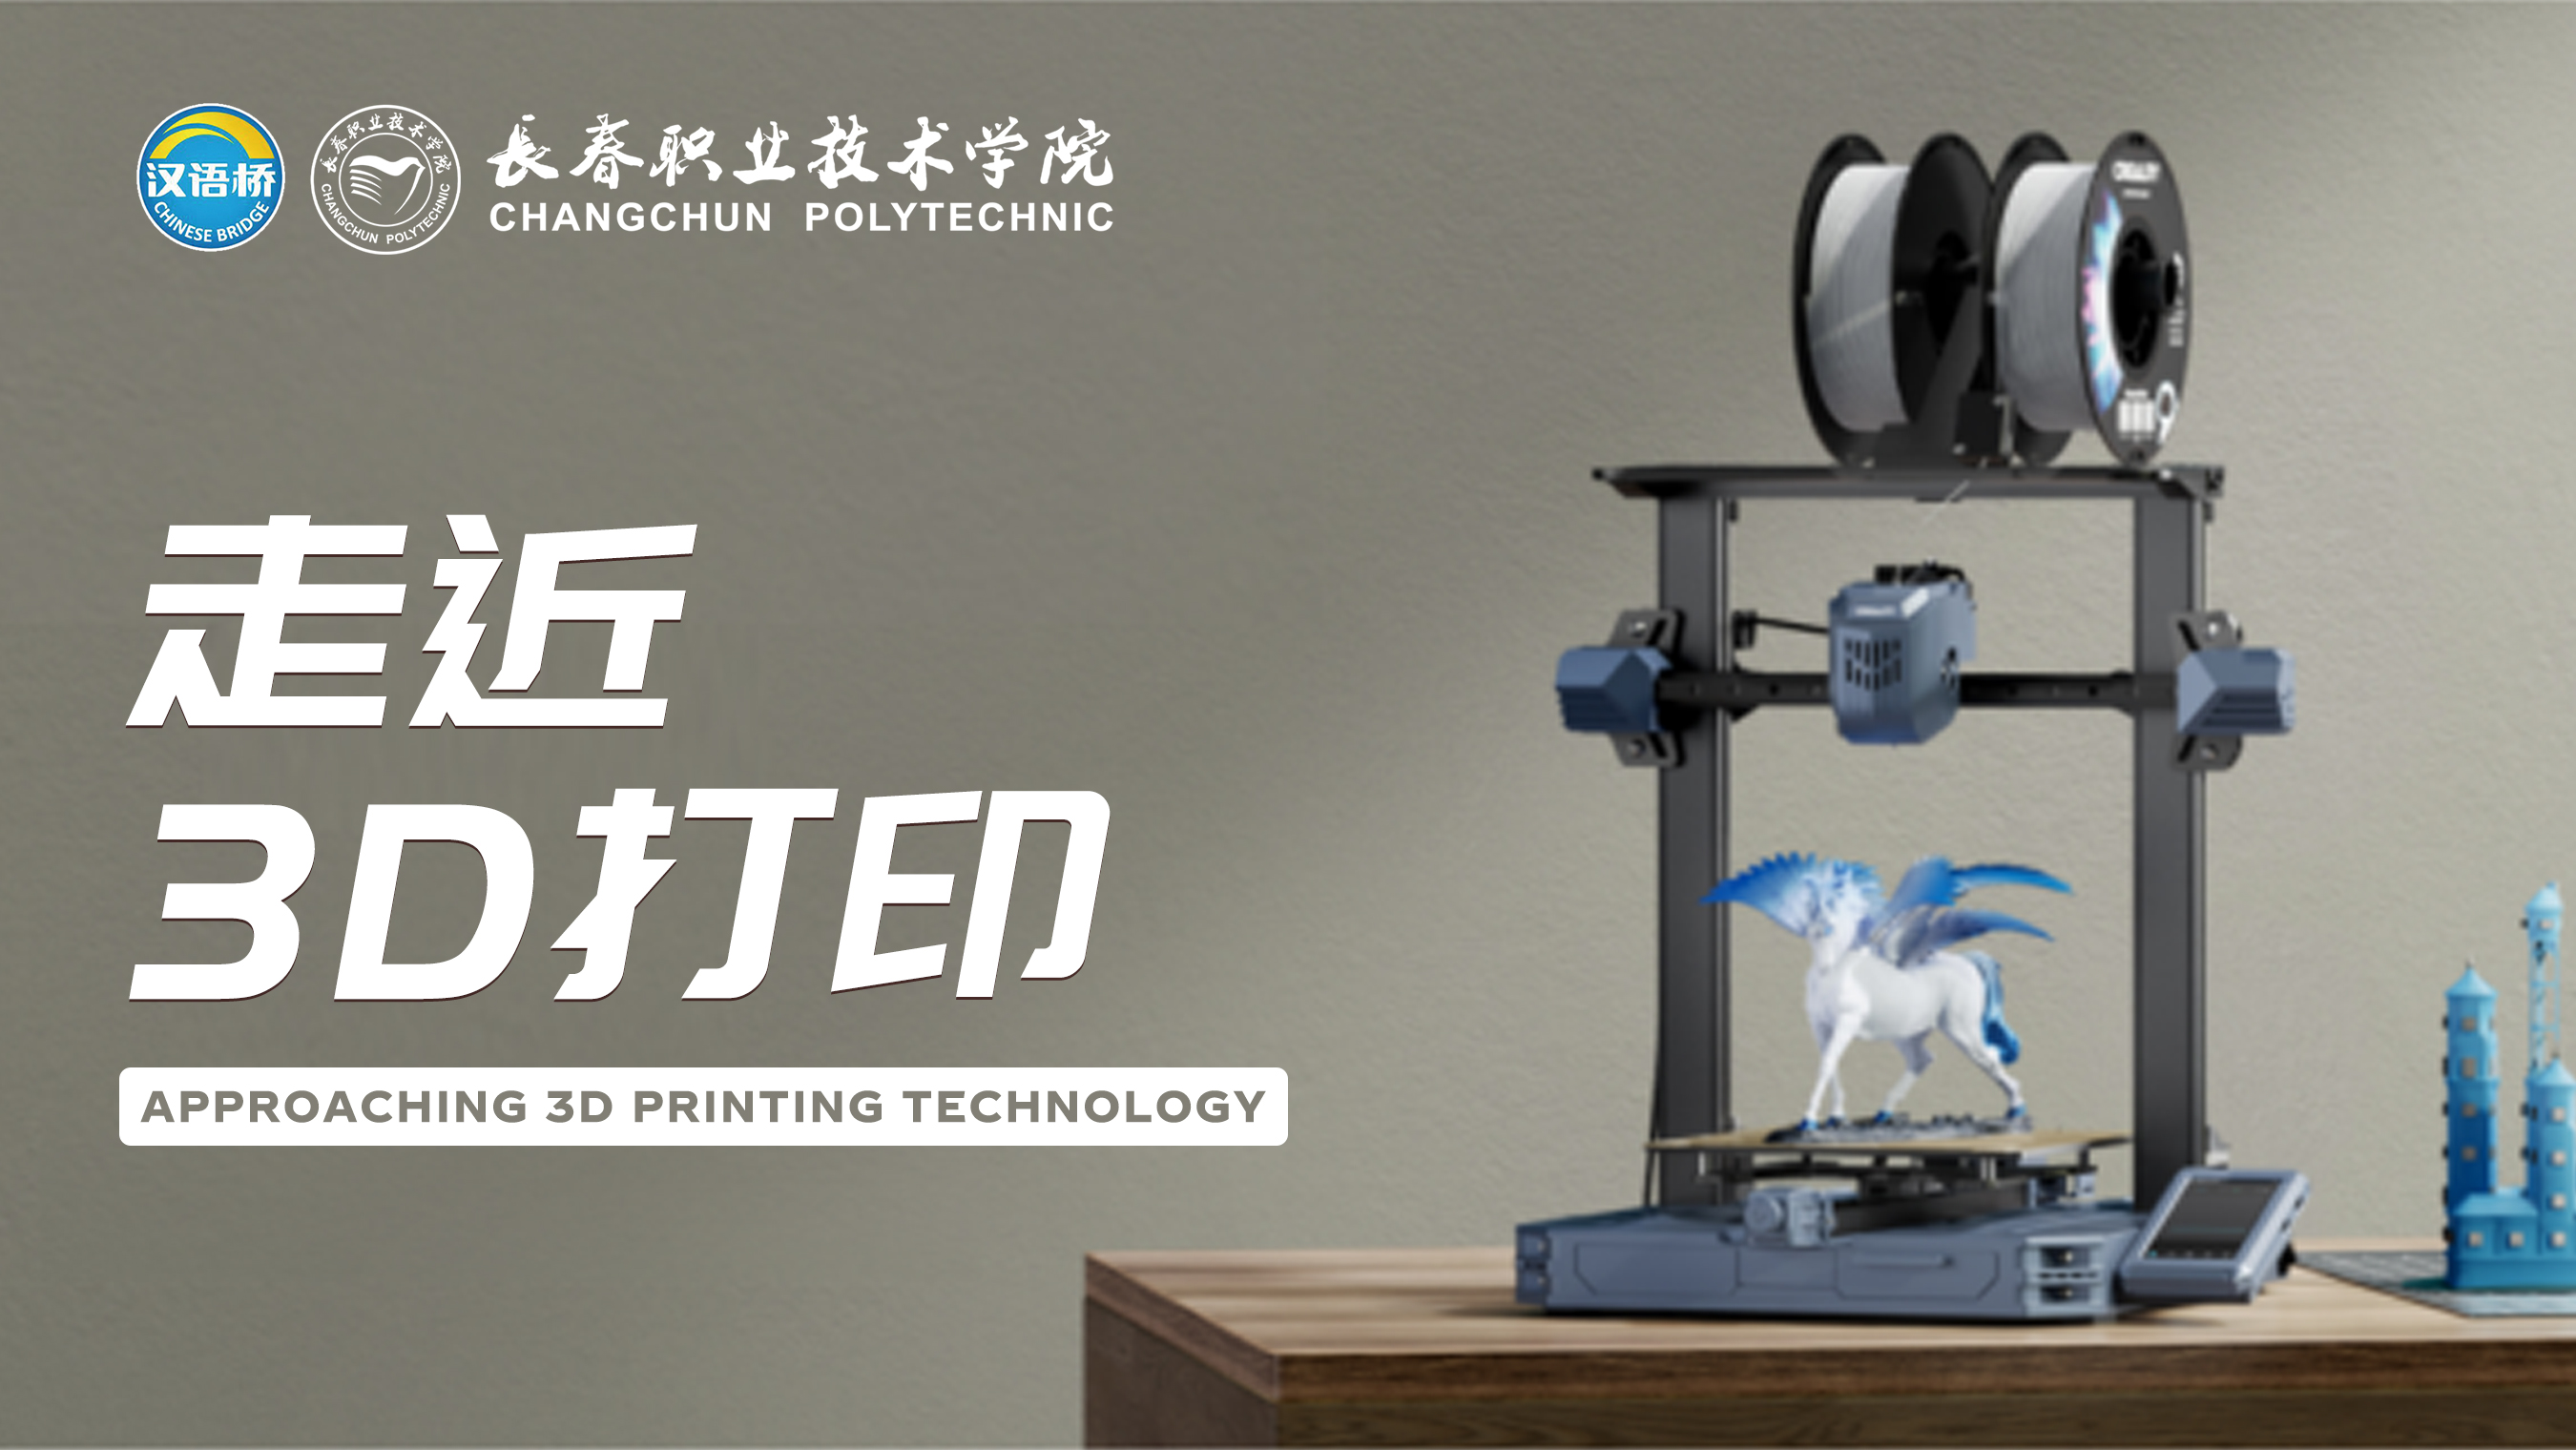 Approaching 3D Printing Technology